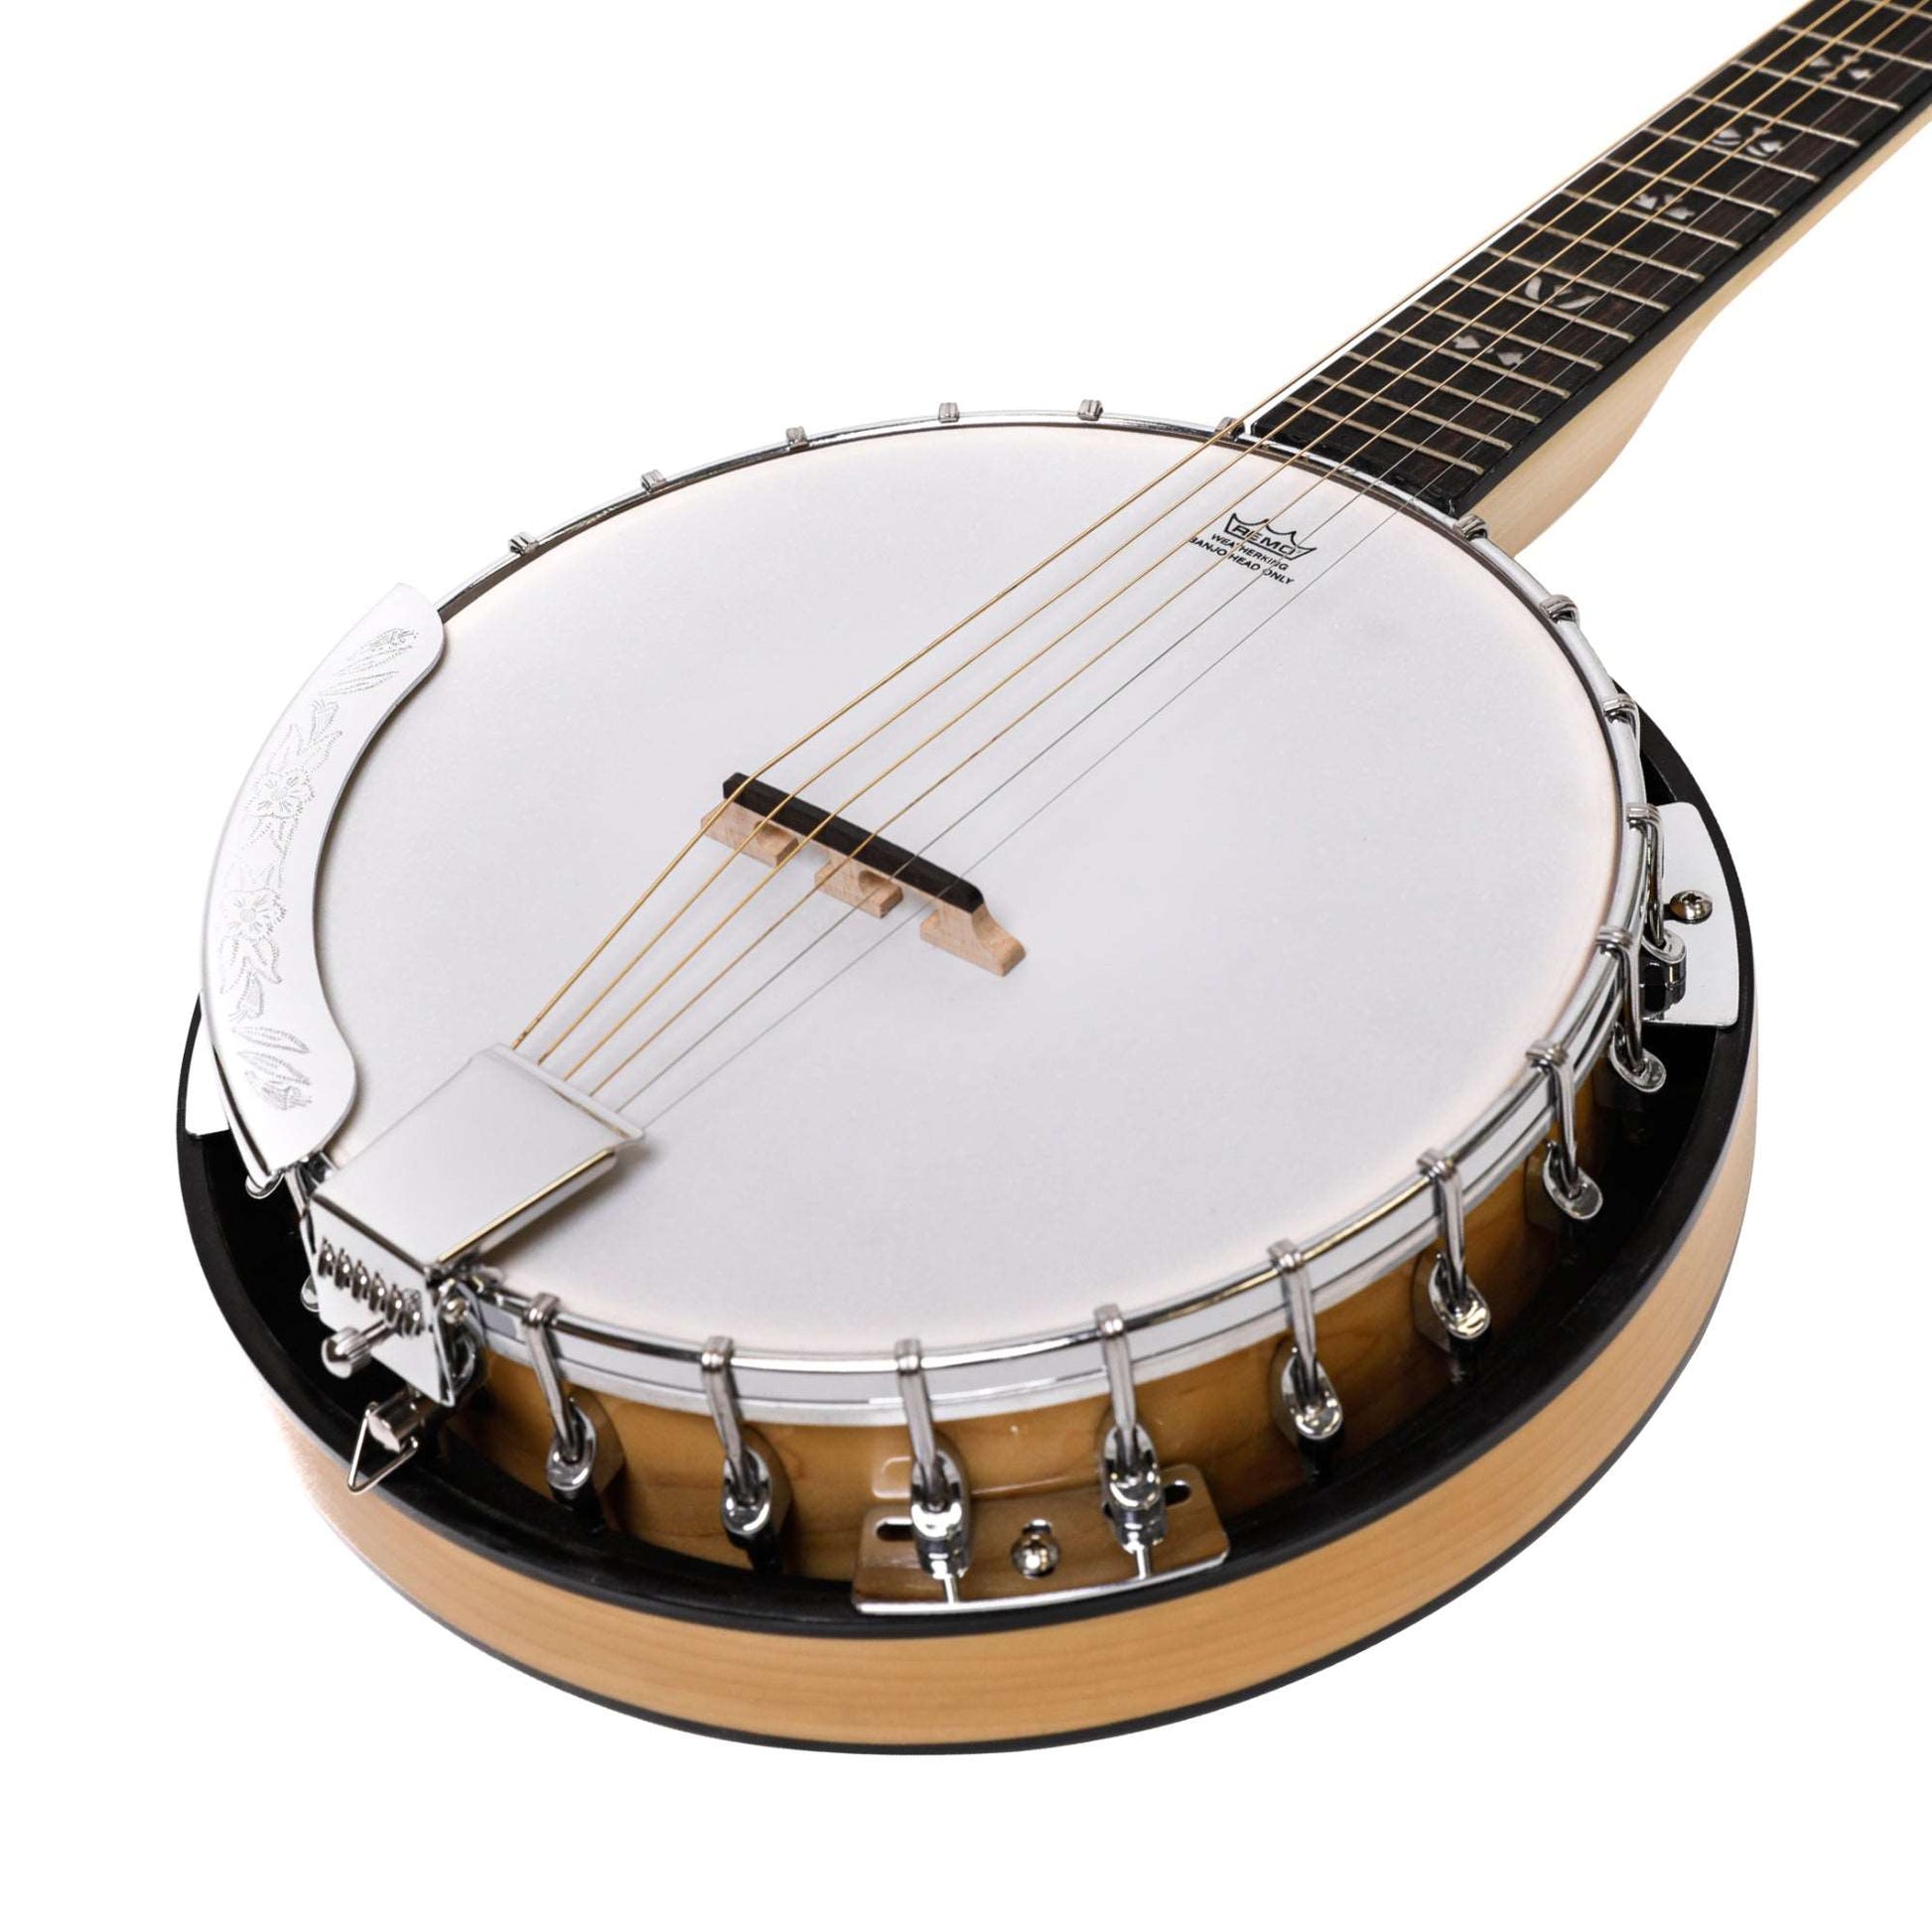 Heartland 6 String Deluxe Irish Banjo 24 Bracket with Closed Solid Back Maple Finish